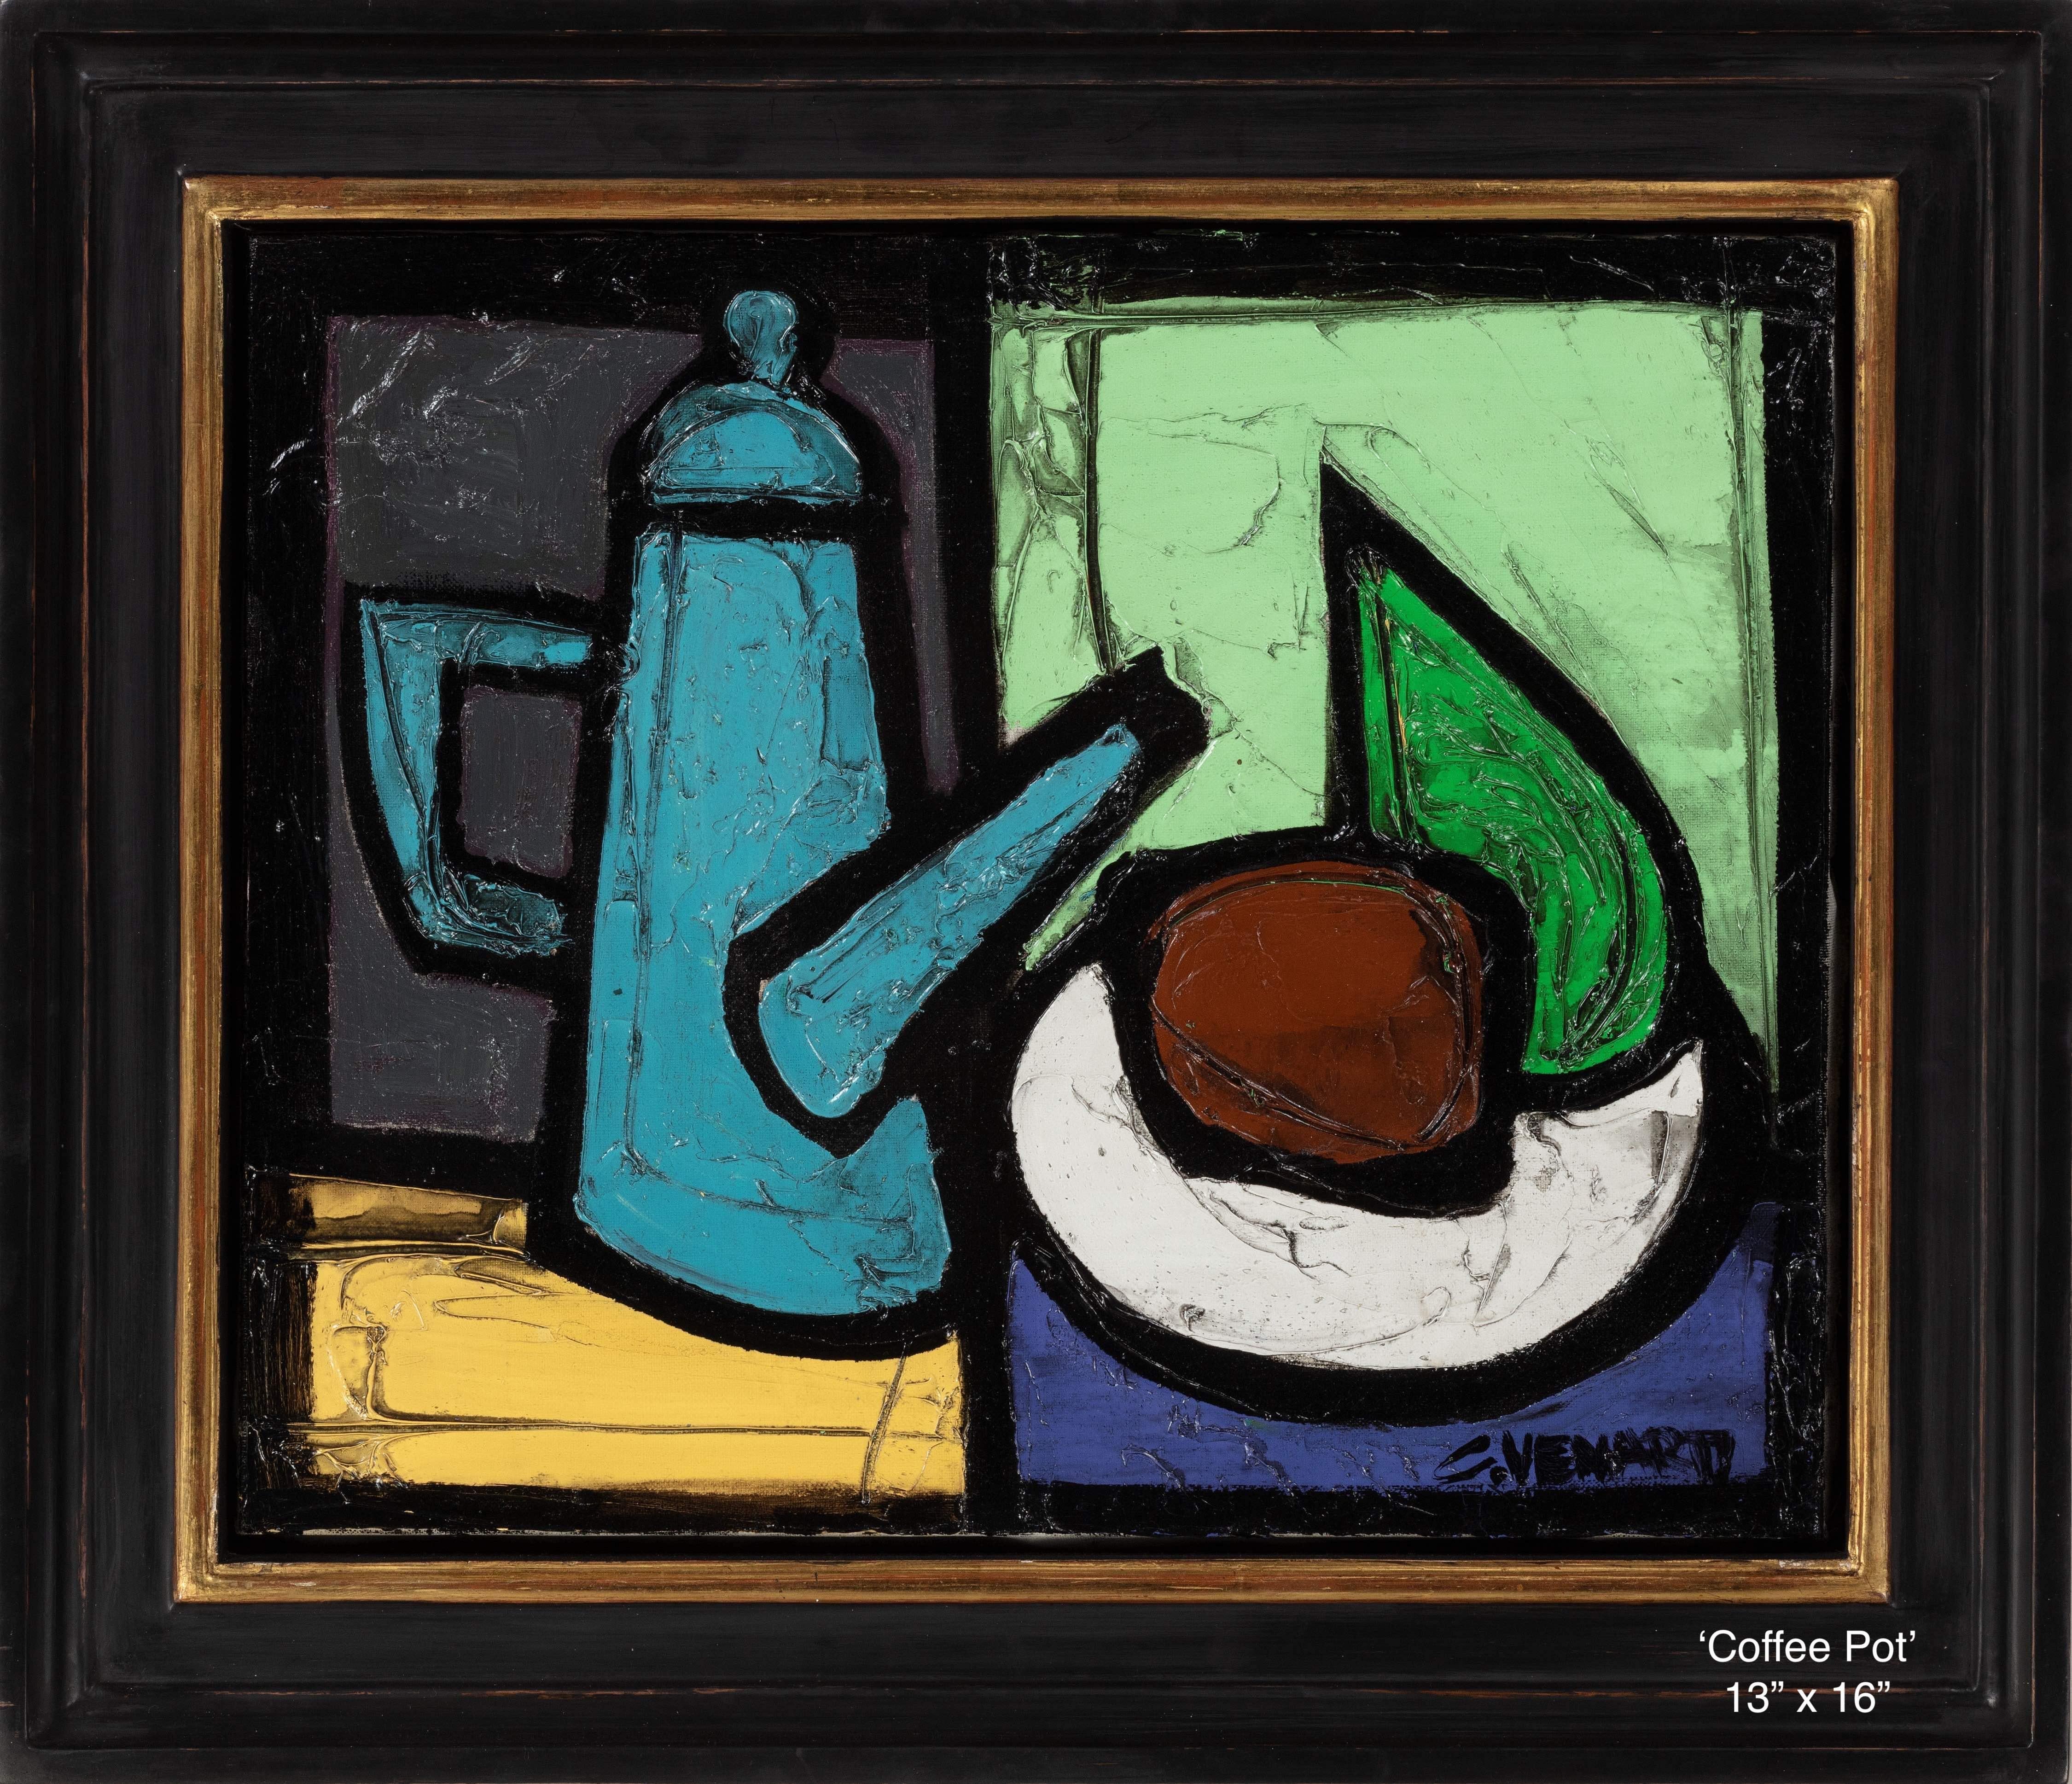 Cubist Style Colourful Still Life painting 'Coffee Pot' by Claude Venard - Painting by Claude Vénard